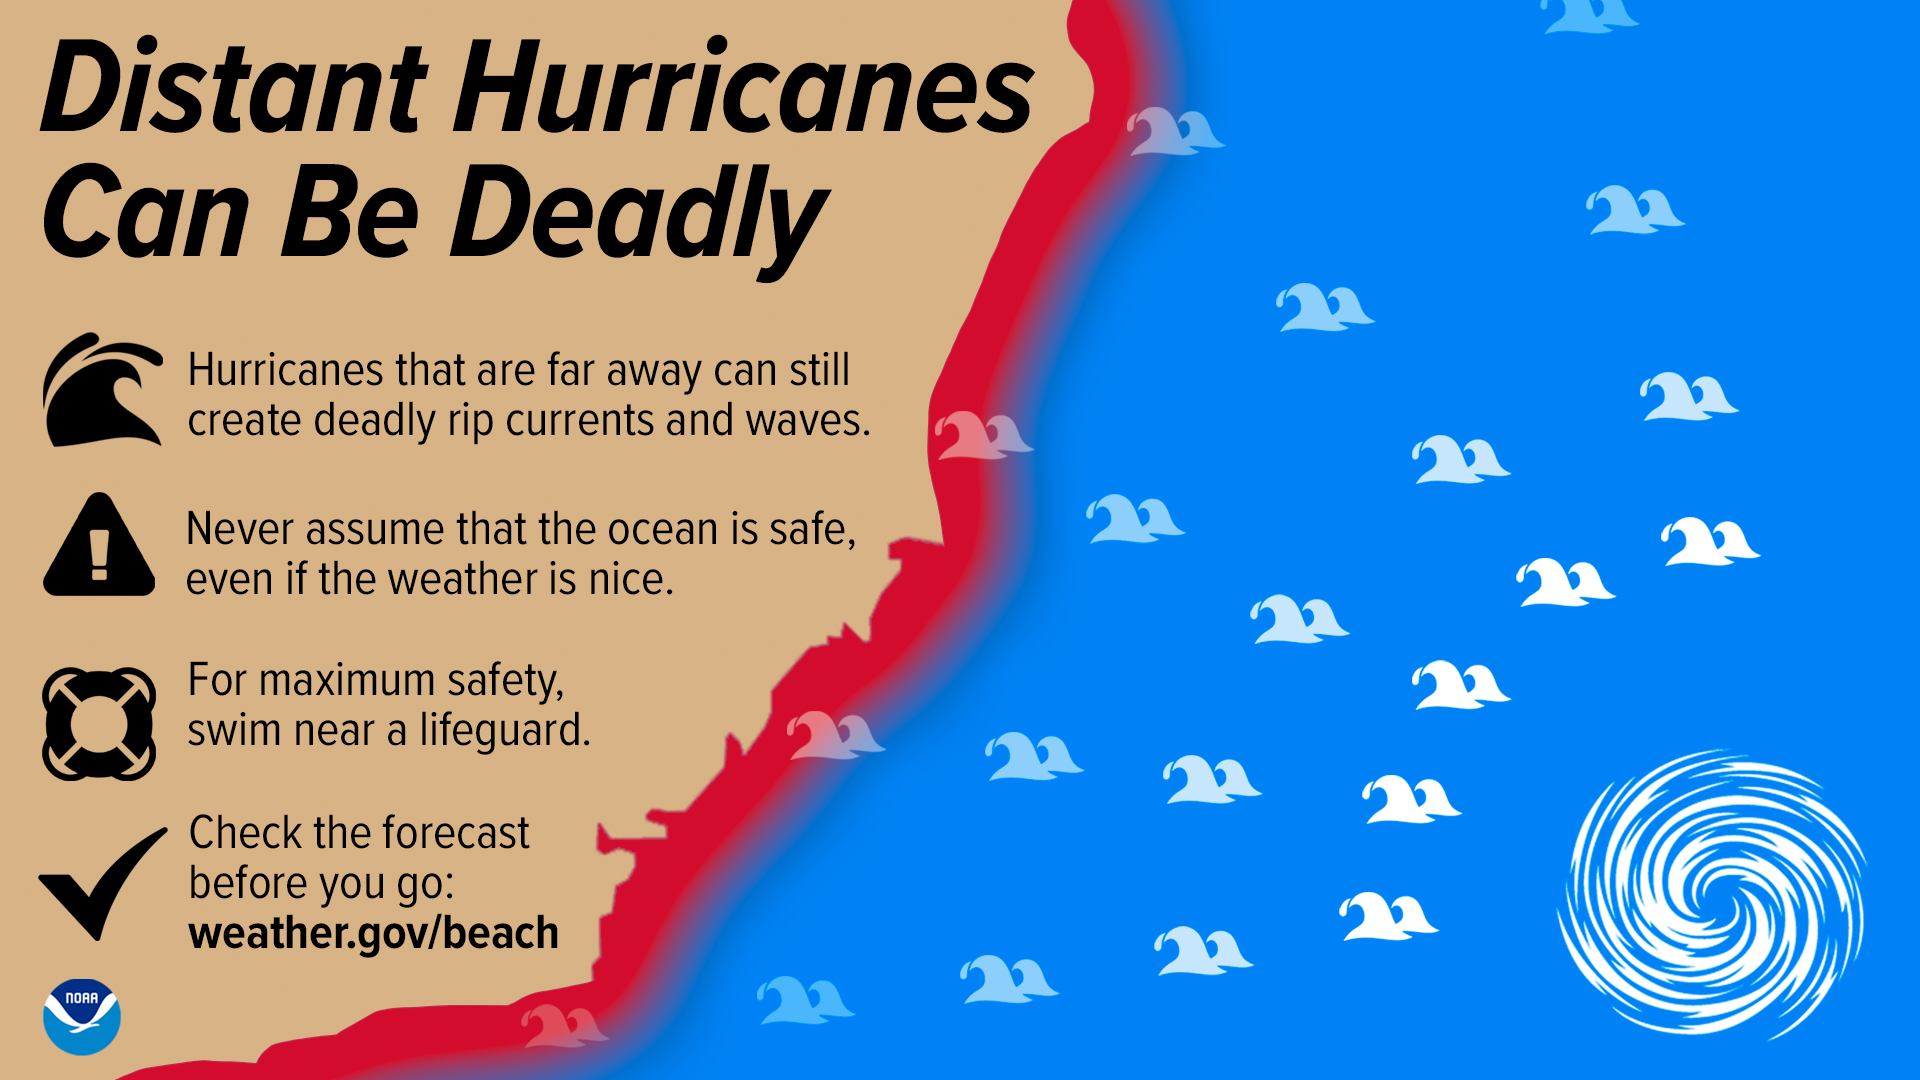 A map of a fictitious coastal area is shown in the background with a tropical system looming in the distance and waves heading toward the beaches. The text on the graphic reads: Distant hurricanes can be deadly. Hurricanes that are far away can still create deadly rip currents and waves. Never assume that the ocean is safe, even if the weather is nice. For maximum safety, swim near a lifeguard. Check the forecast before you go at weather.gov/beach.